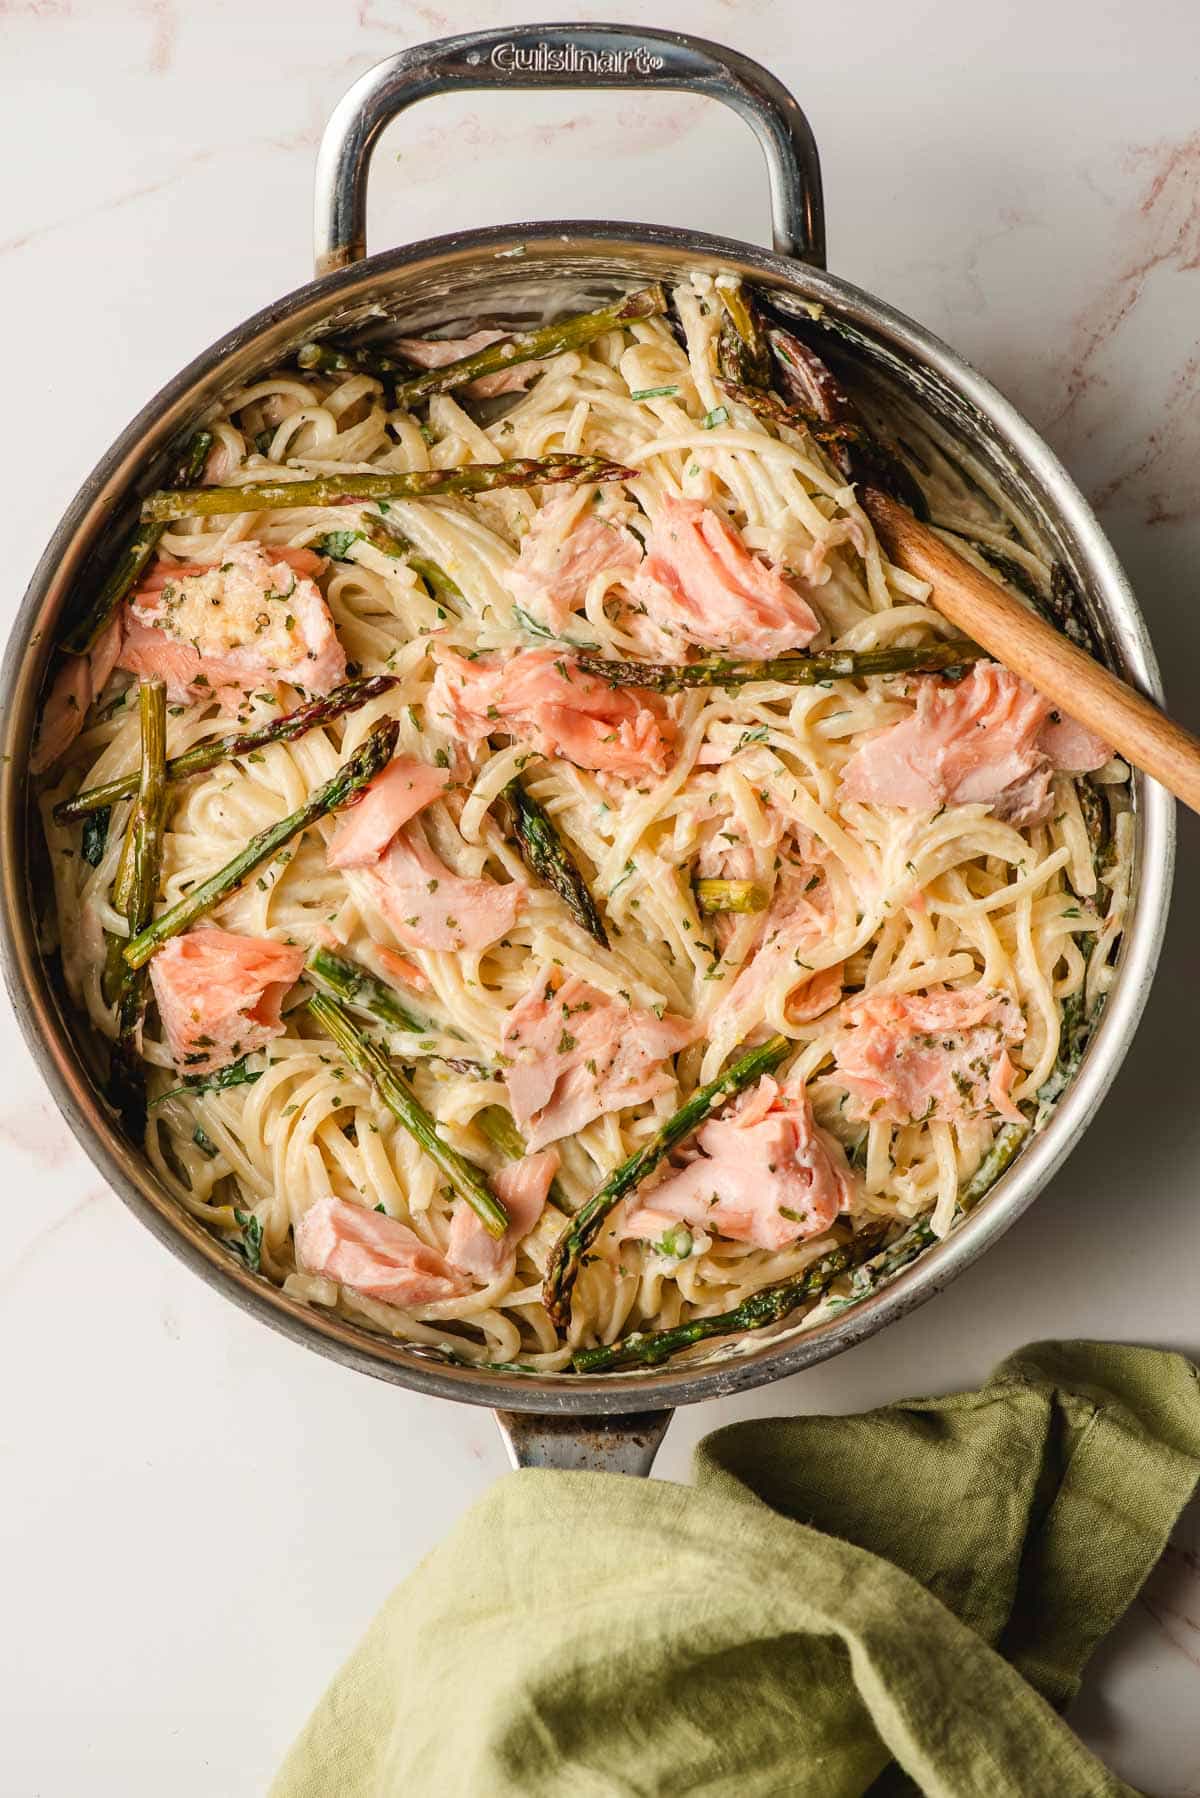 Creamy salmon and asparagus pasta in a skillet.